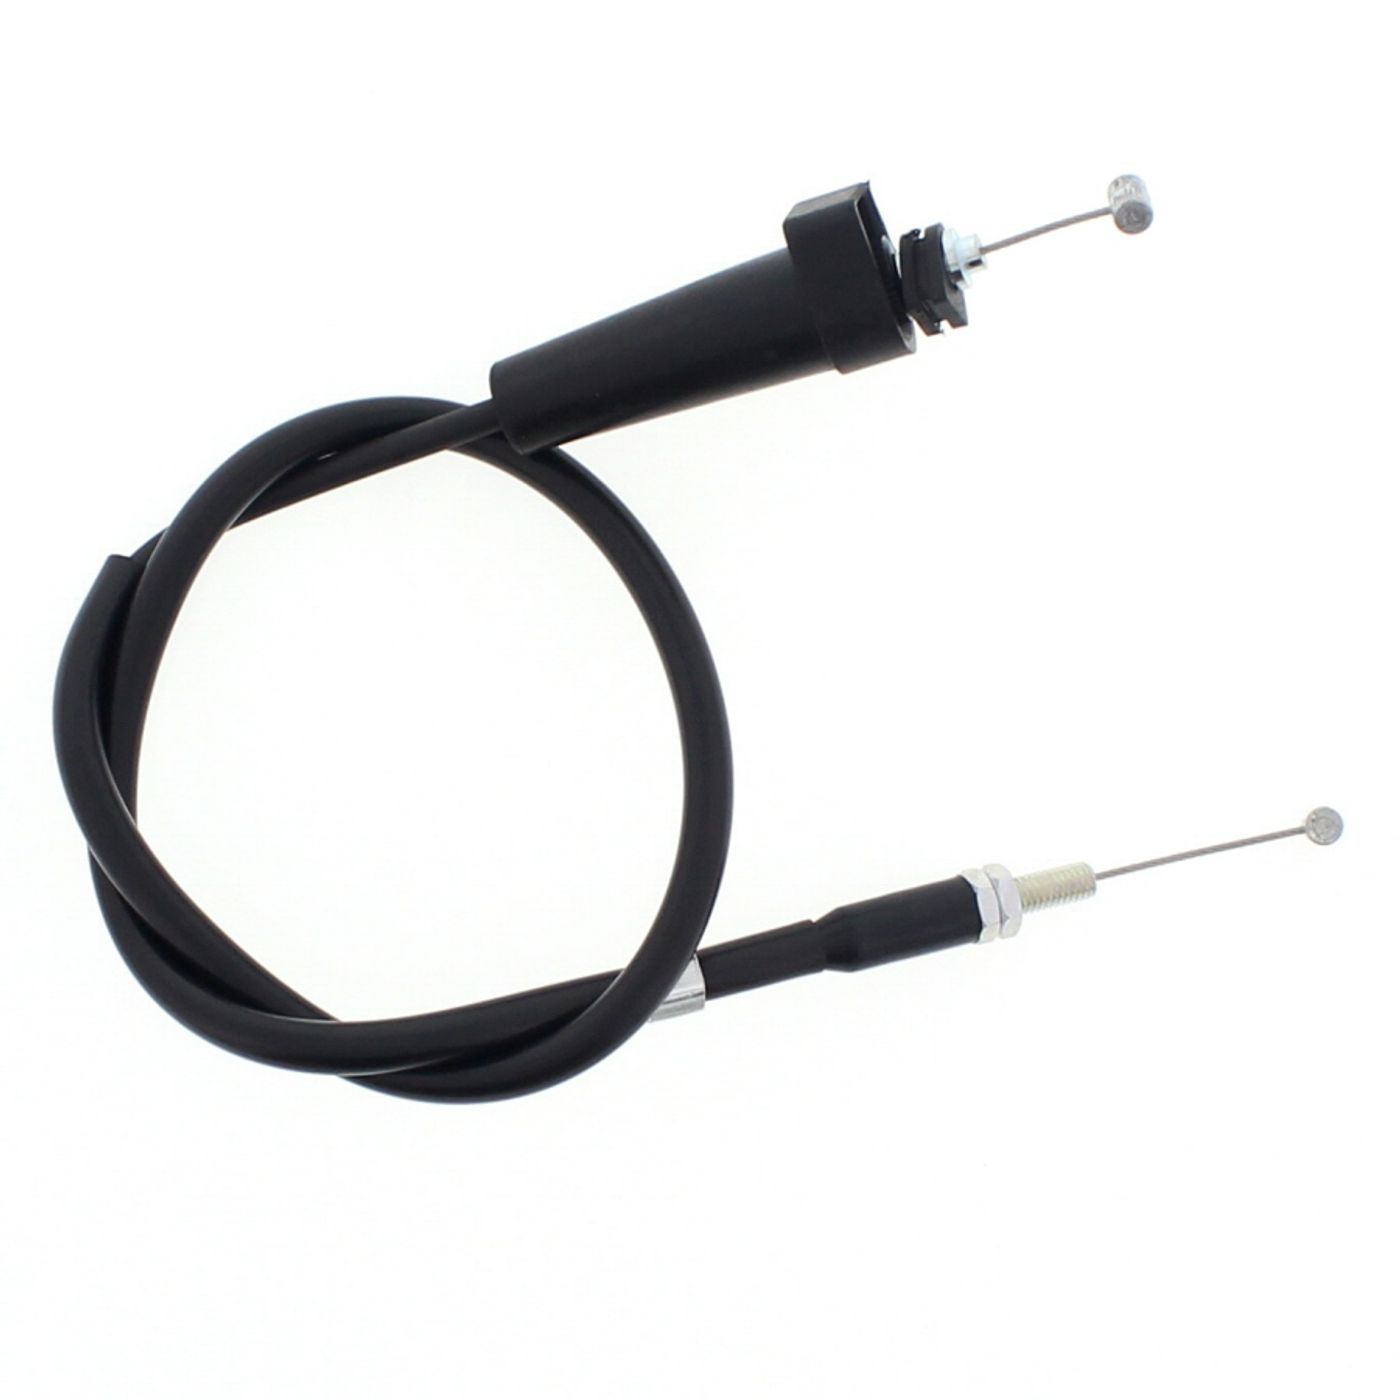 Wrp Throttle Cables - WRP451089 image